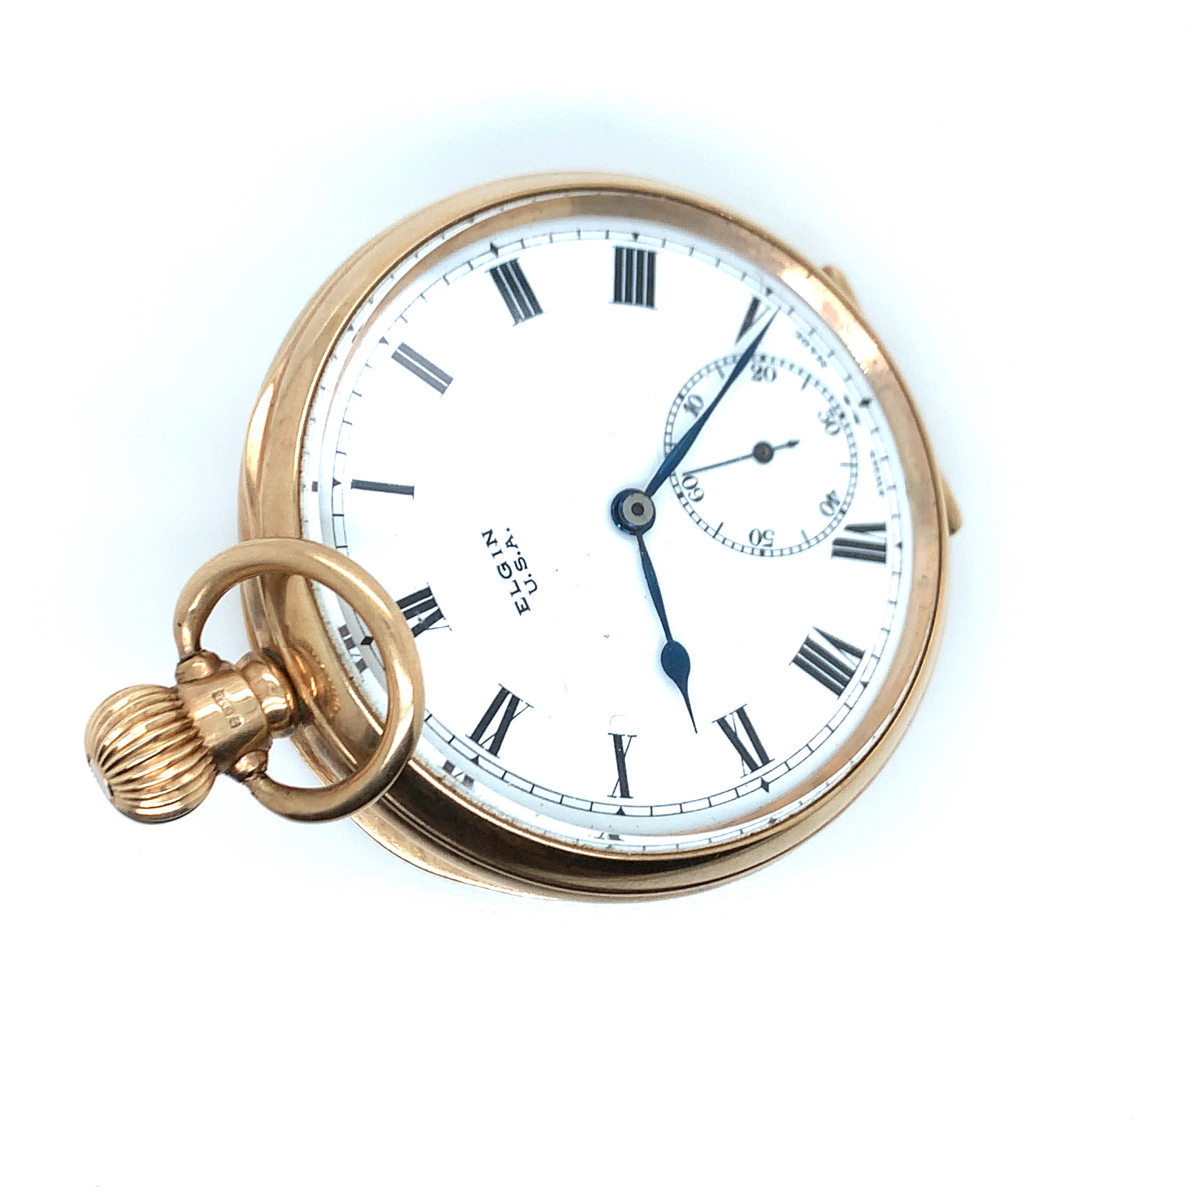 A 9ct HALLMARKED GOLD OPEN FACE ELGIN POCKET WATCH. THE INNER CASE DATED 1922, BIRMINGHAM, A.L.D, - Image 5 of 9